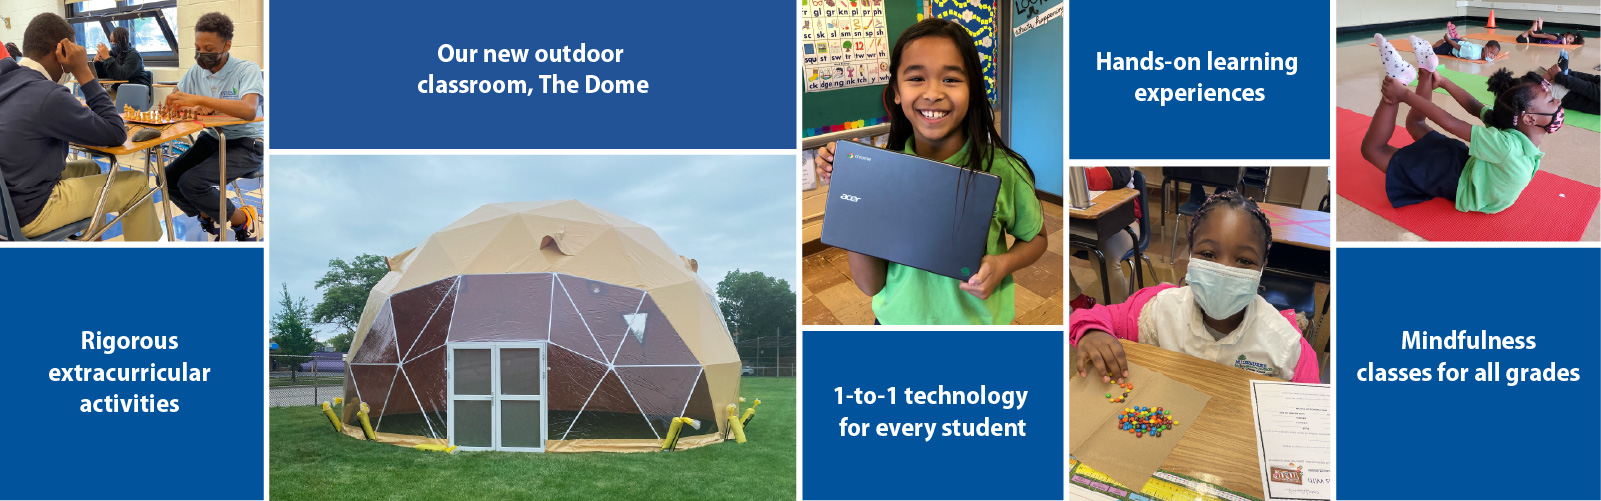 Extracurricular activities, one to one technology, hands on learning, outdoor classroom and mindfulness